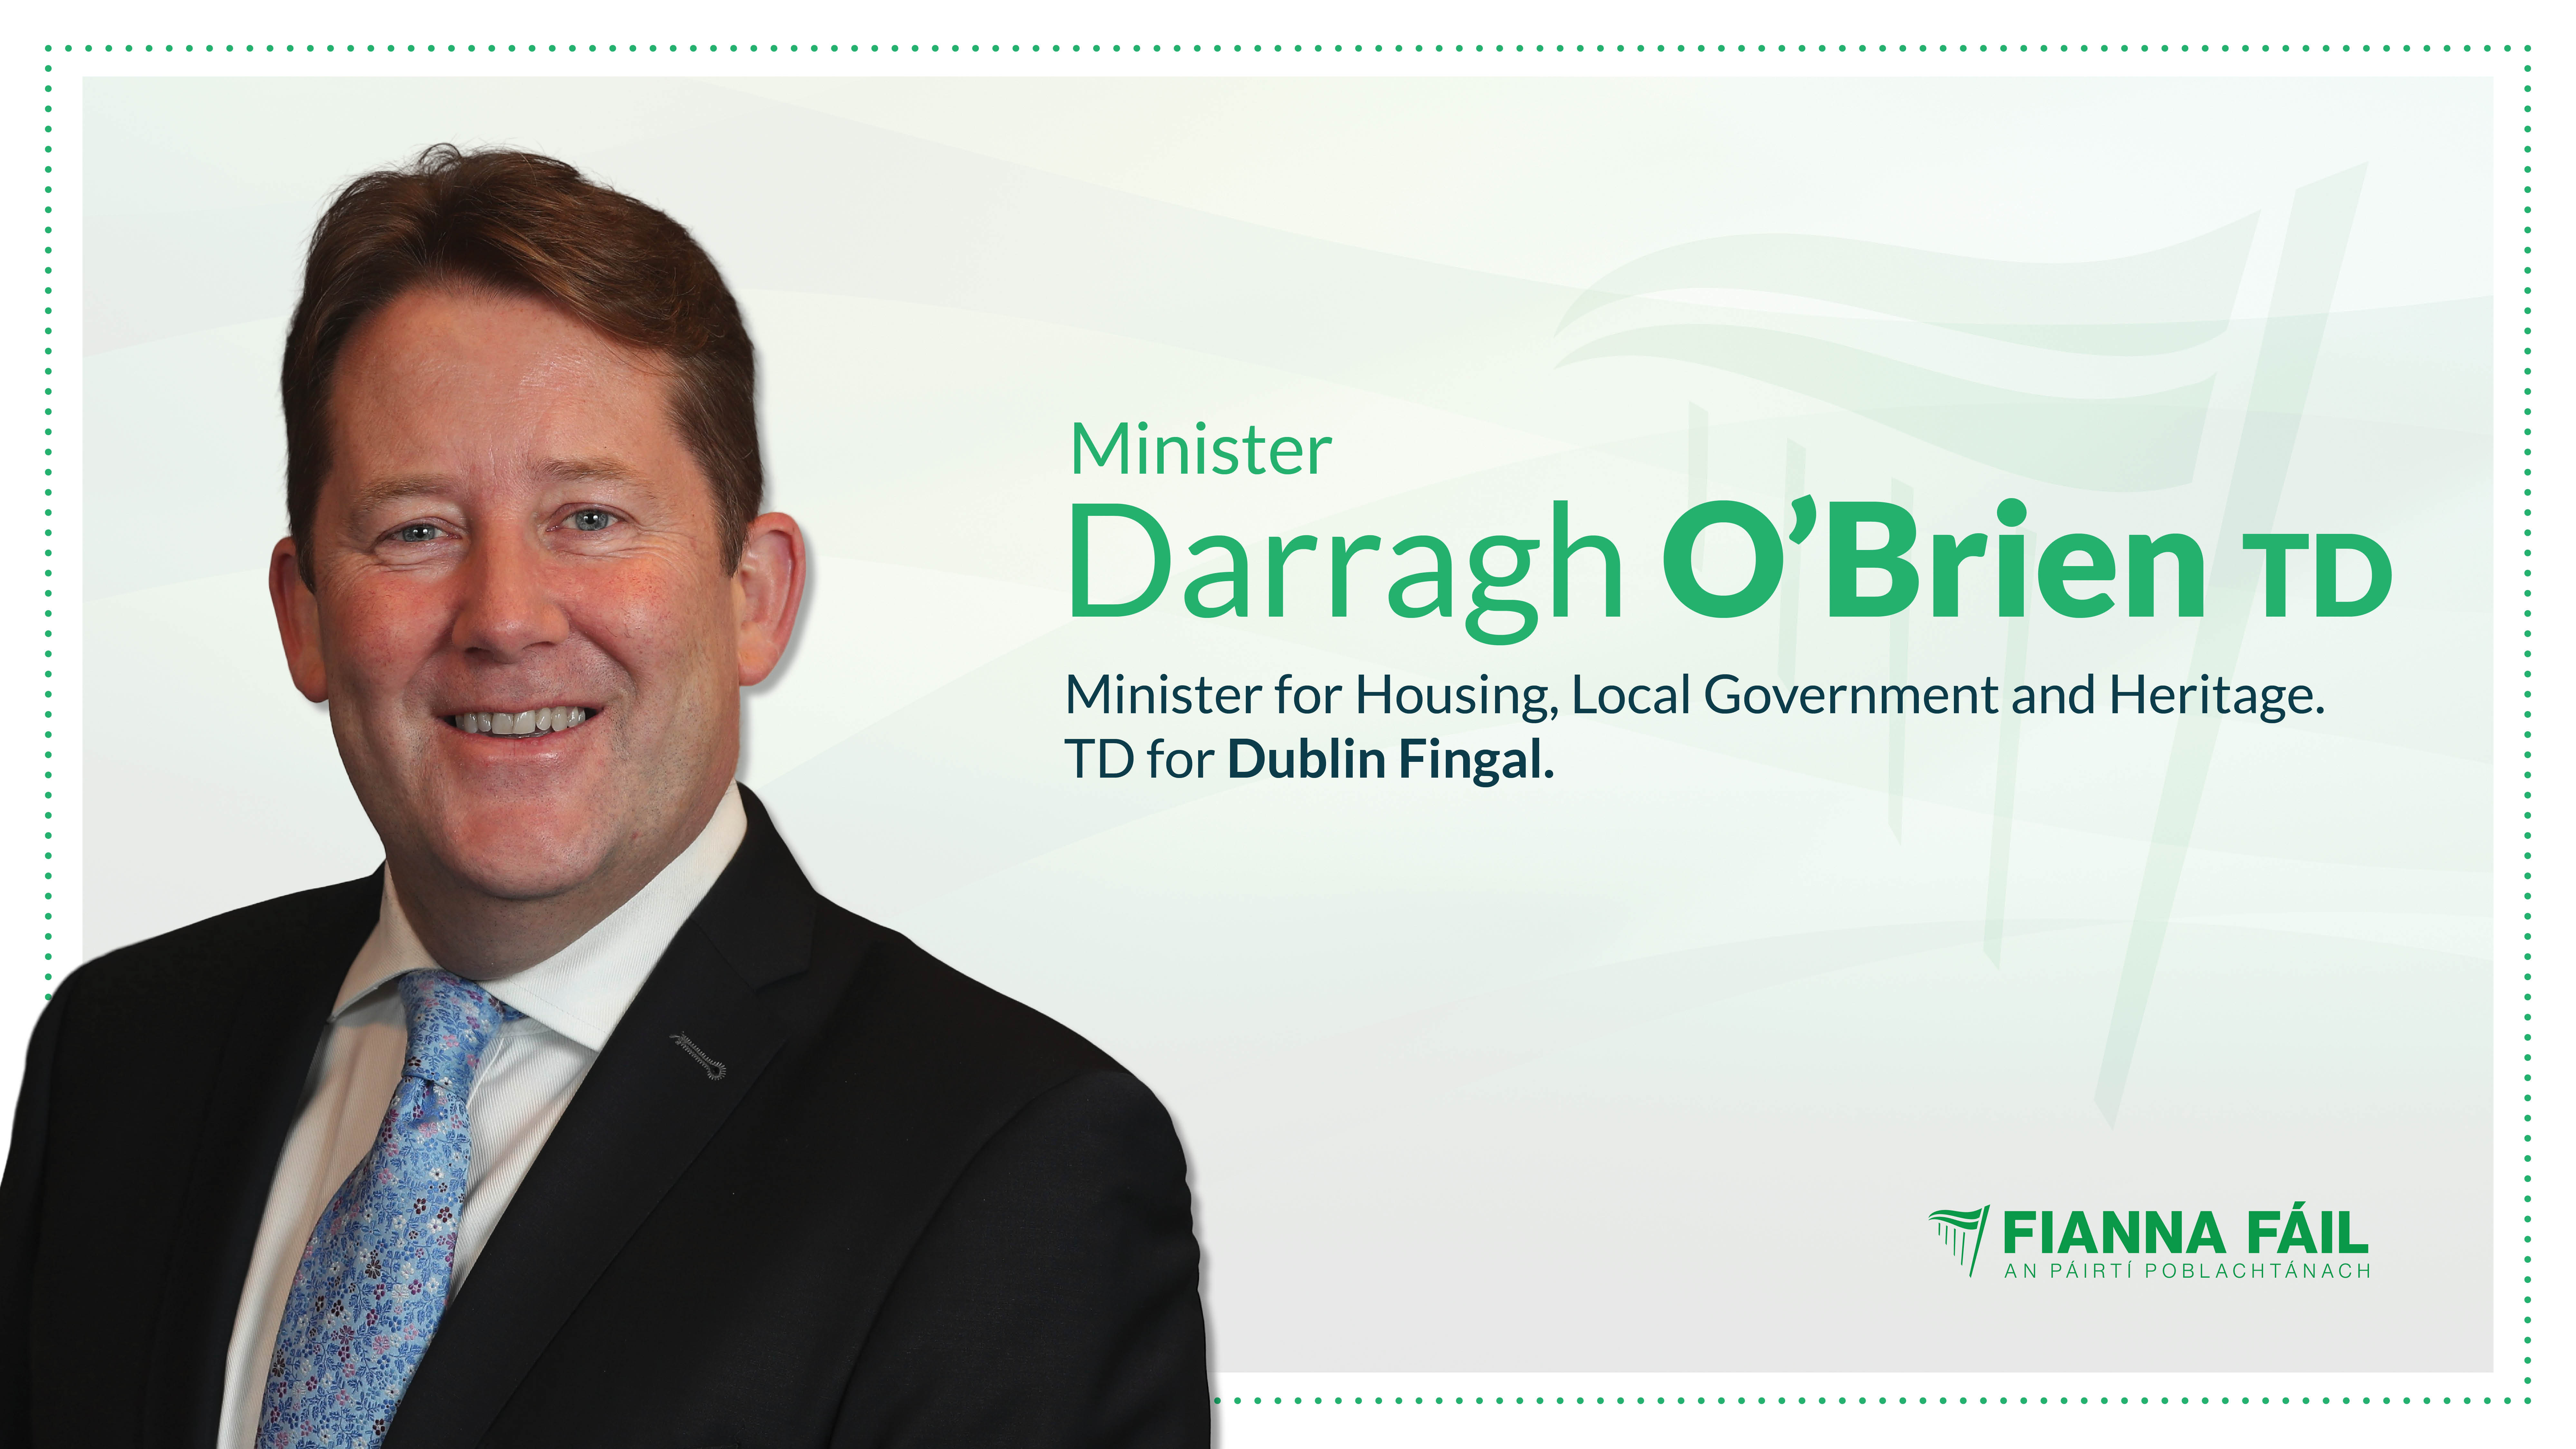 Improved Homes for Older People and those with a Disability as Minister O’Brien Announces over €80m in Funding